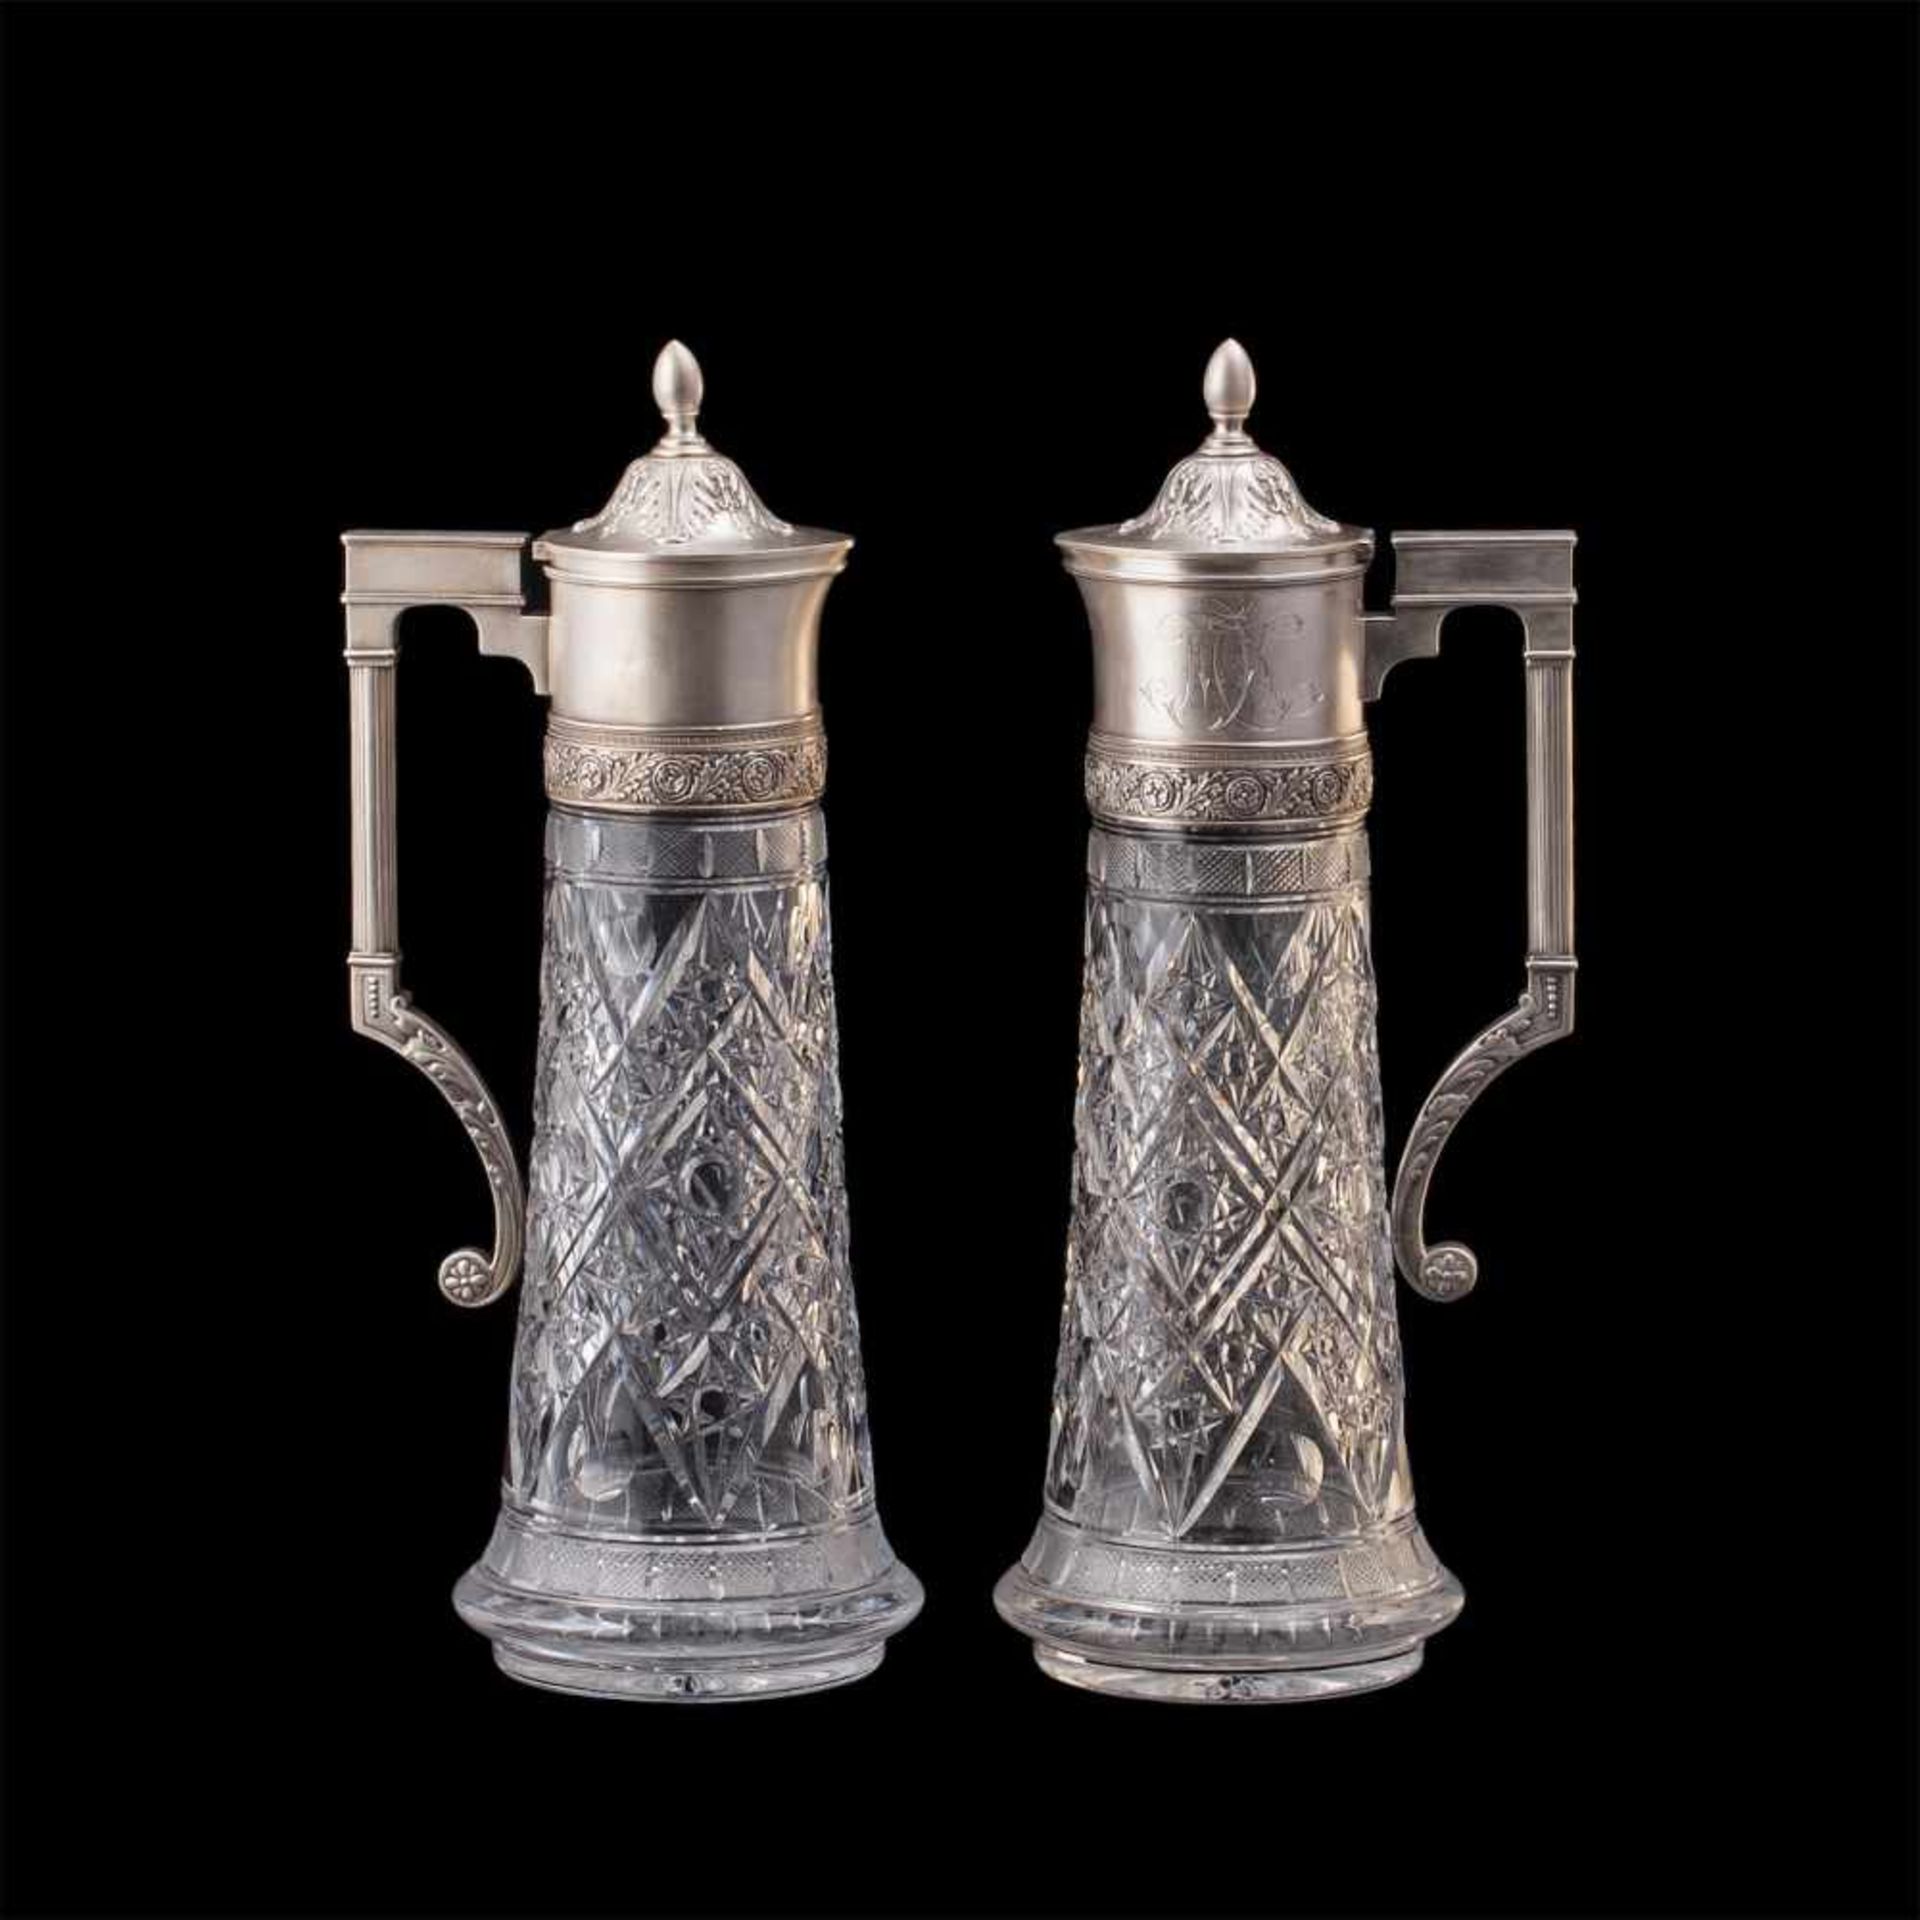 A pair of Russian silver-gilt crystal decantersA Pair of grand Russian silver-gilt and cut-glass